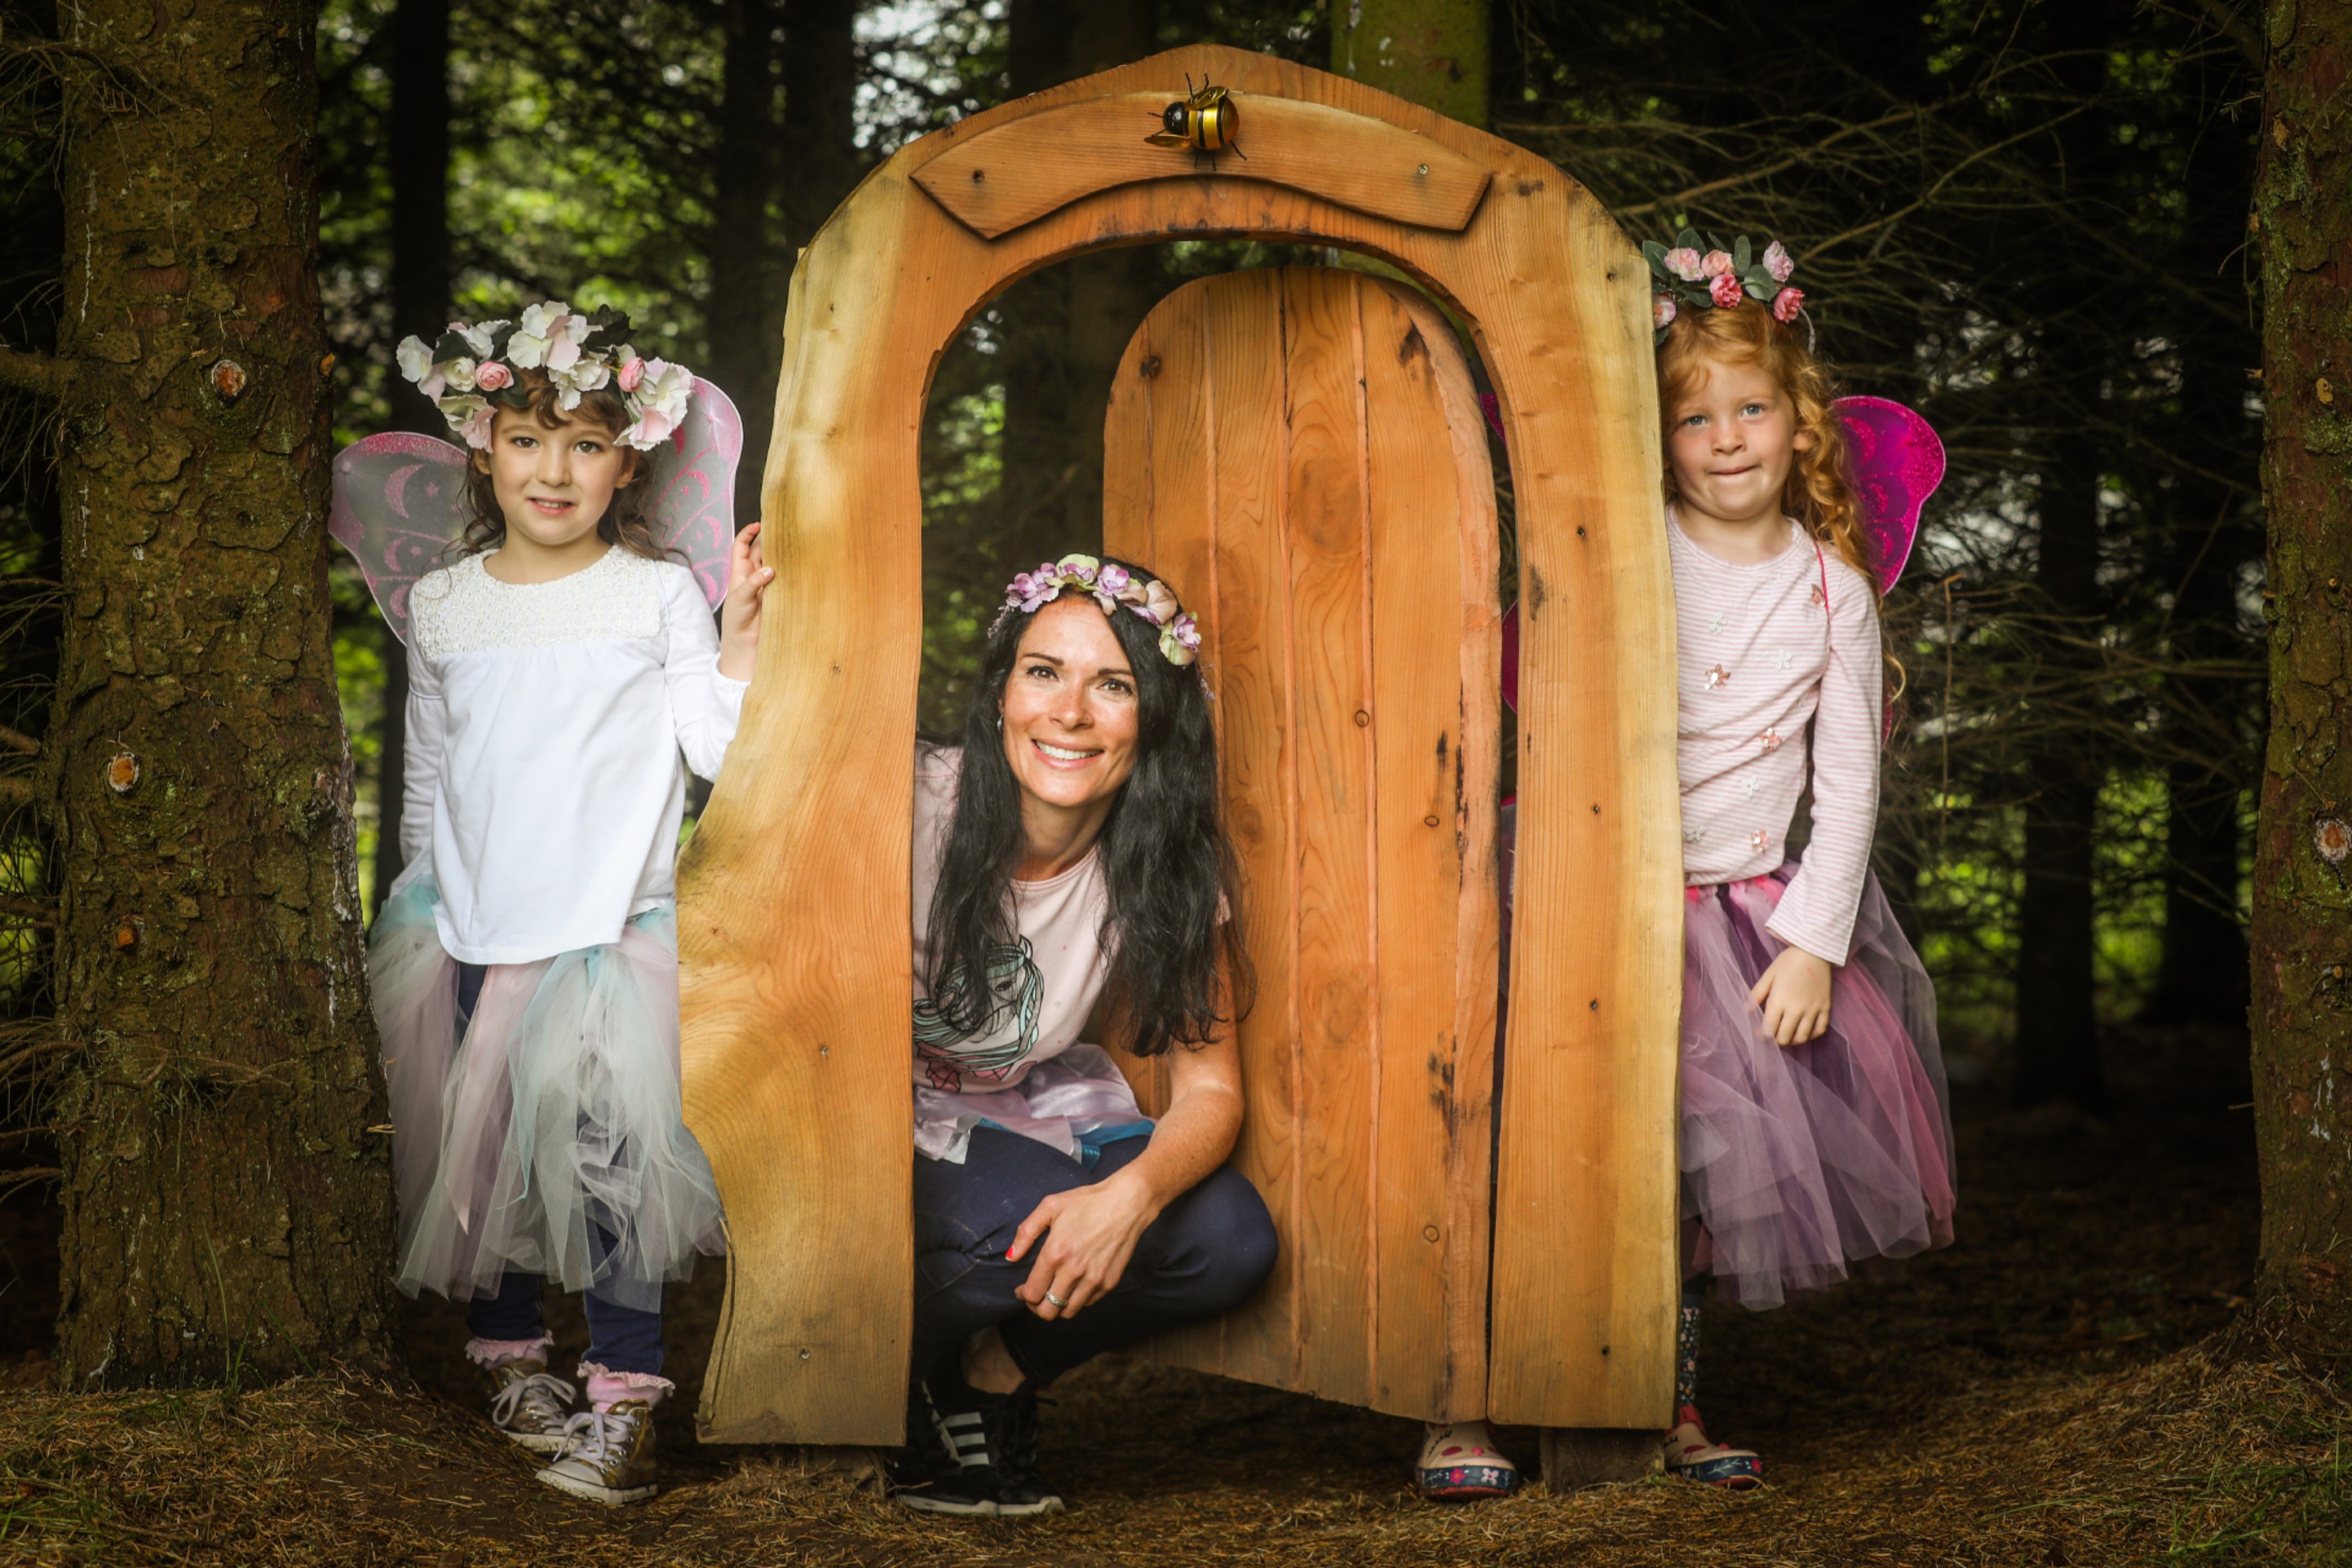 Gayle and her cute little fairy friends enjoy Brechin Castle's Fairy Trail.